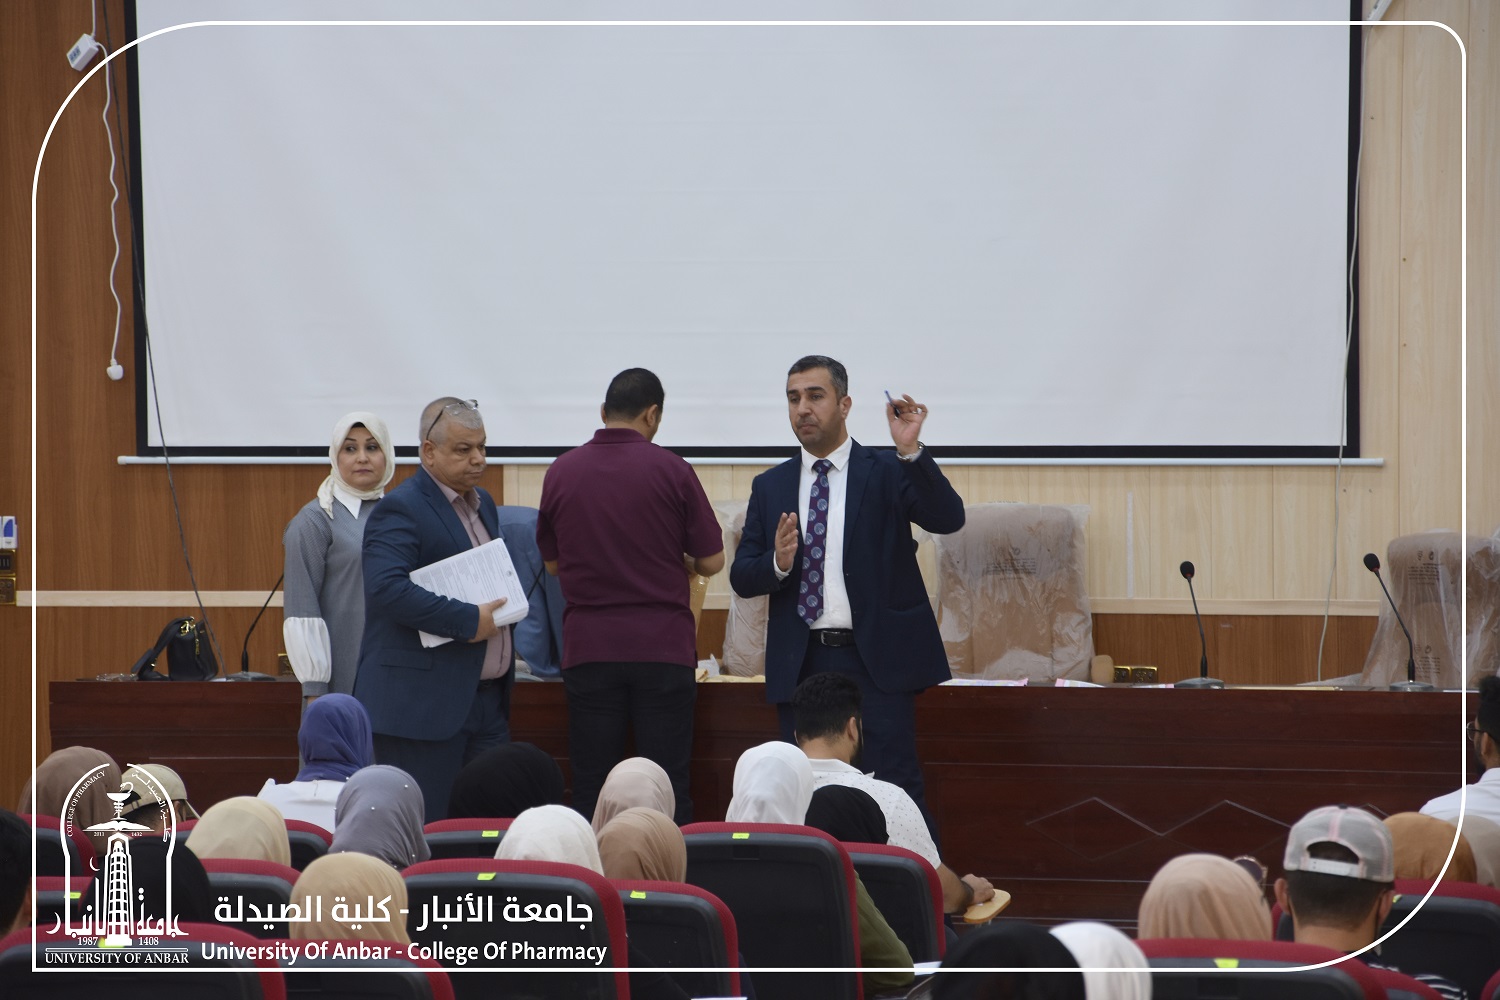 The launch of the final exams for the second semester of the academic year 2022-2021